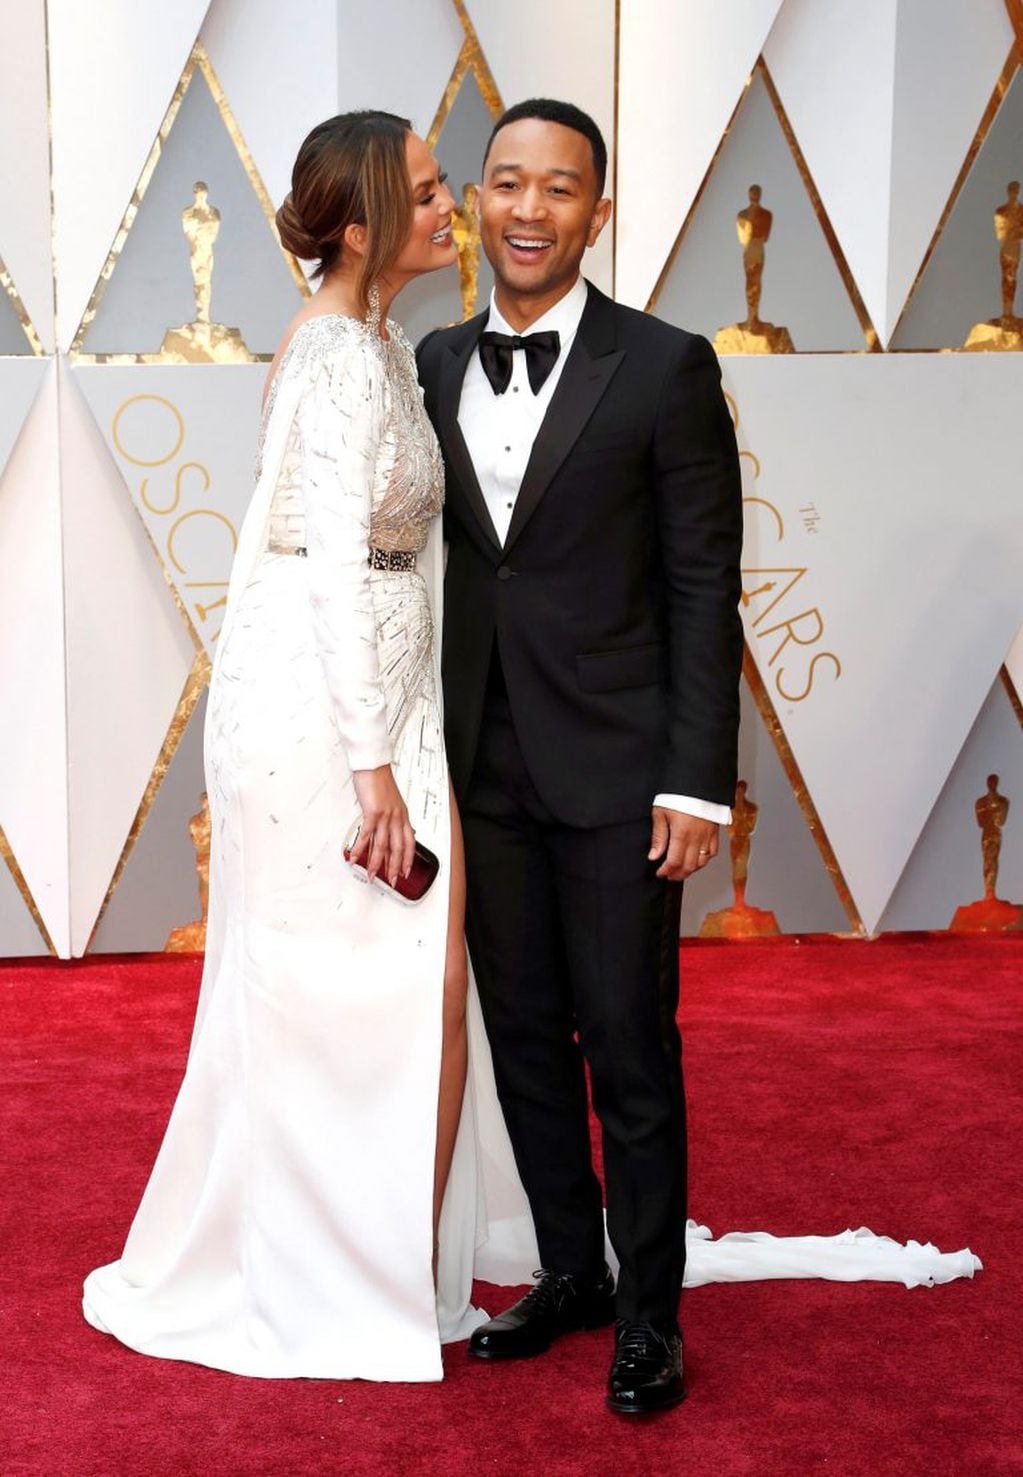 AJB001. Hollywood (United States), 26/02/2017.- John Legend (R) and Chrissy Teigen (L) arrive for the 89th annual Academy Awards ceremony at the Dolby Theatre in Hollywood, California, USA, 26 February 2017. The Oscars are presented for outstanding indivi